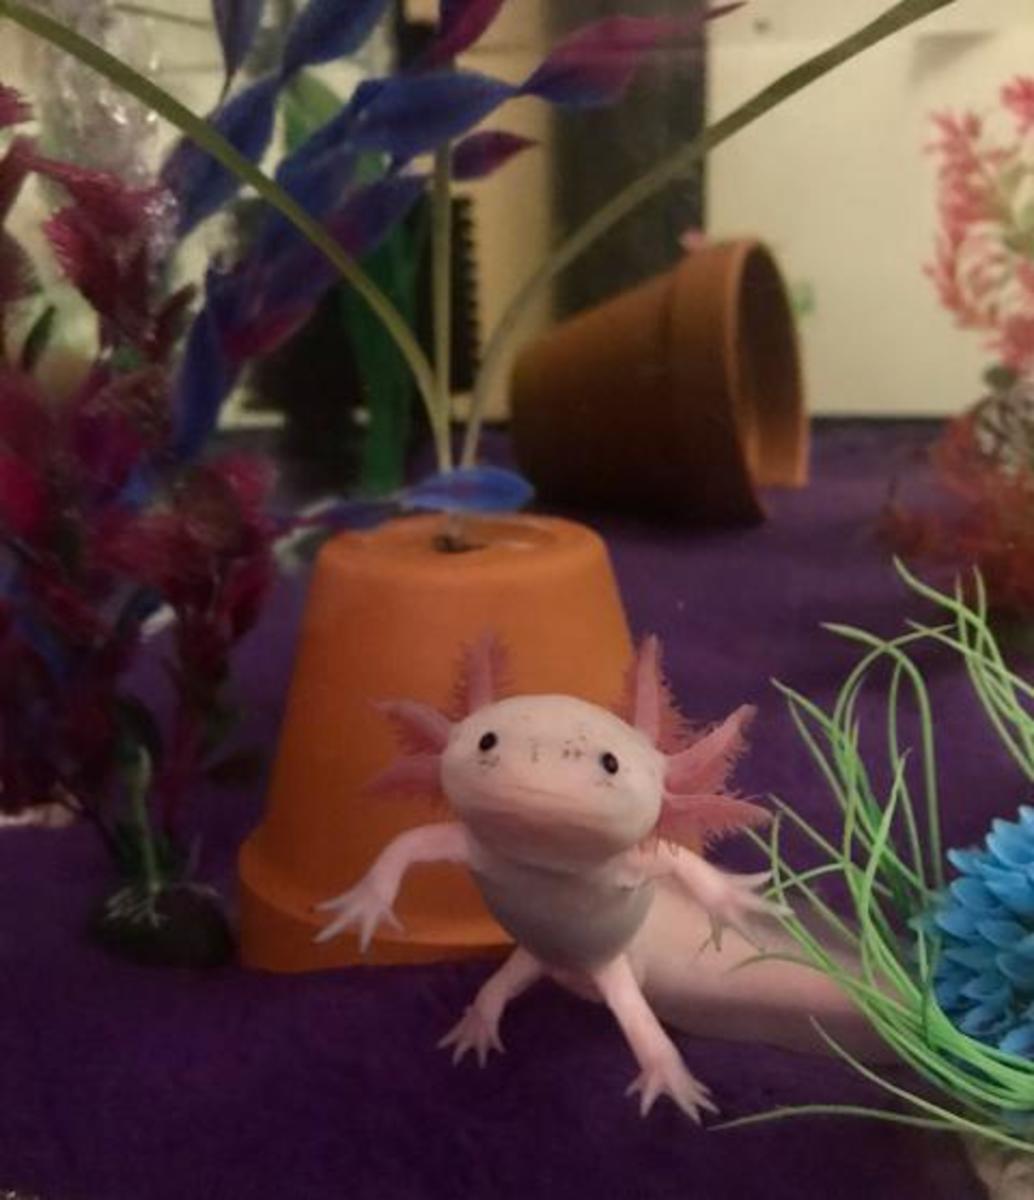 Axolotls lift their legs and float in odd poses. 